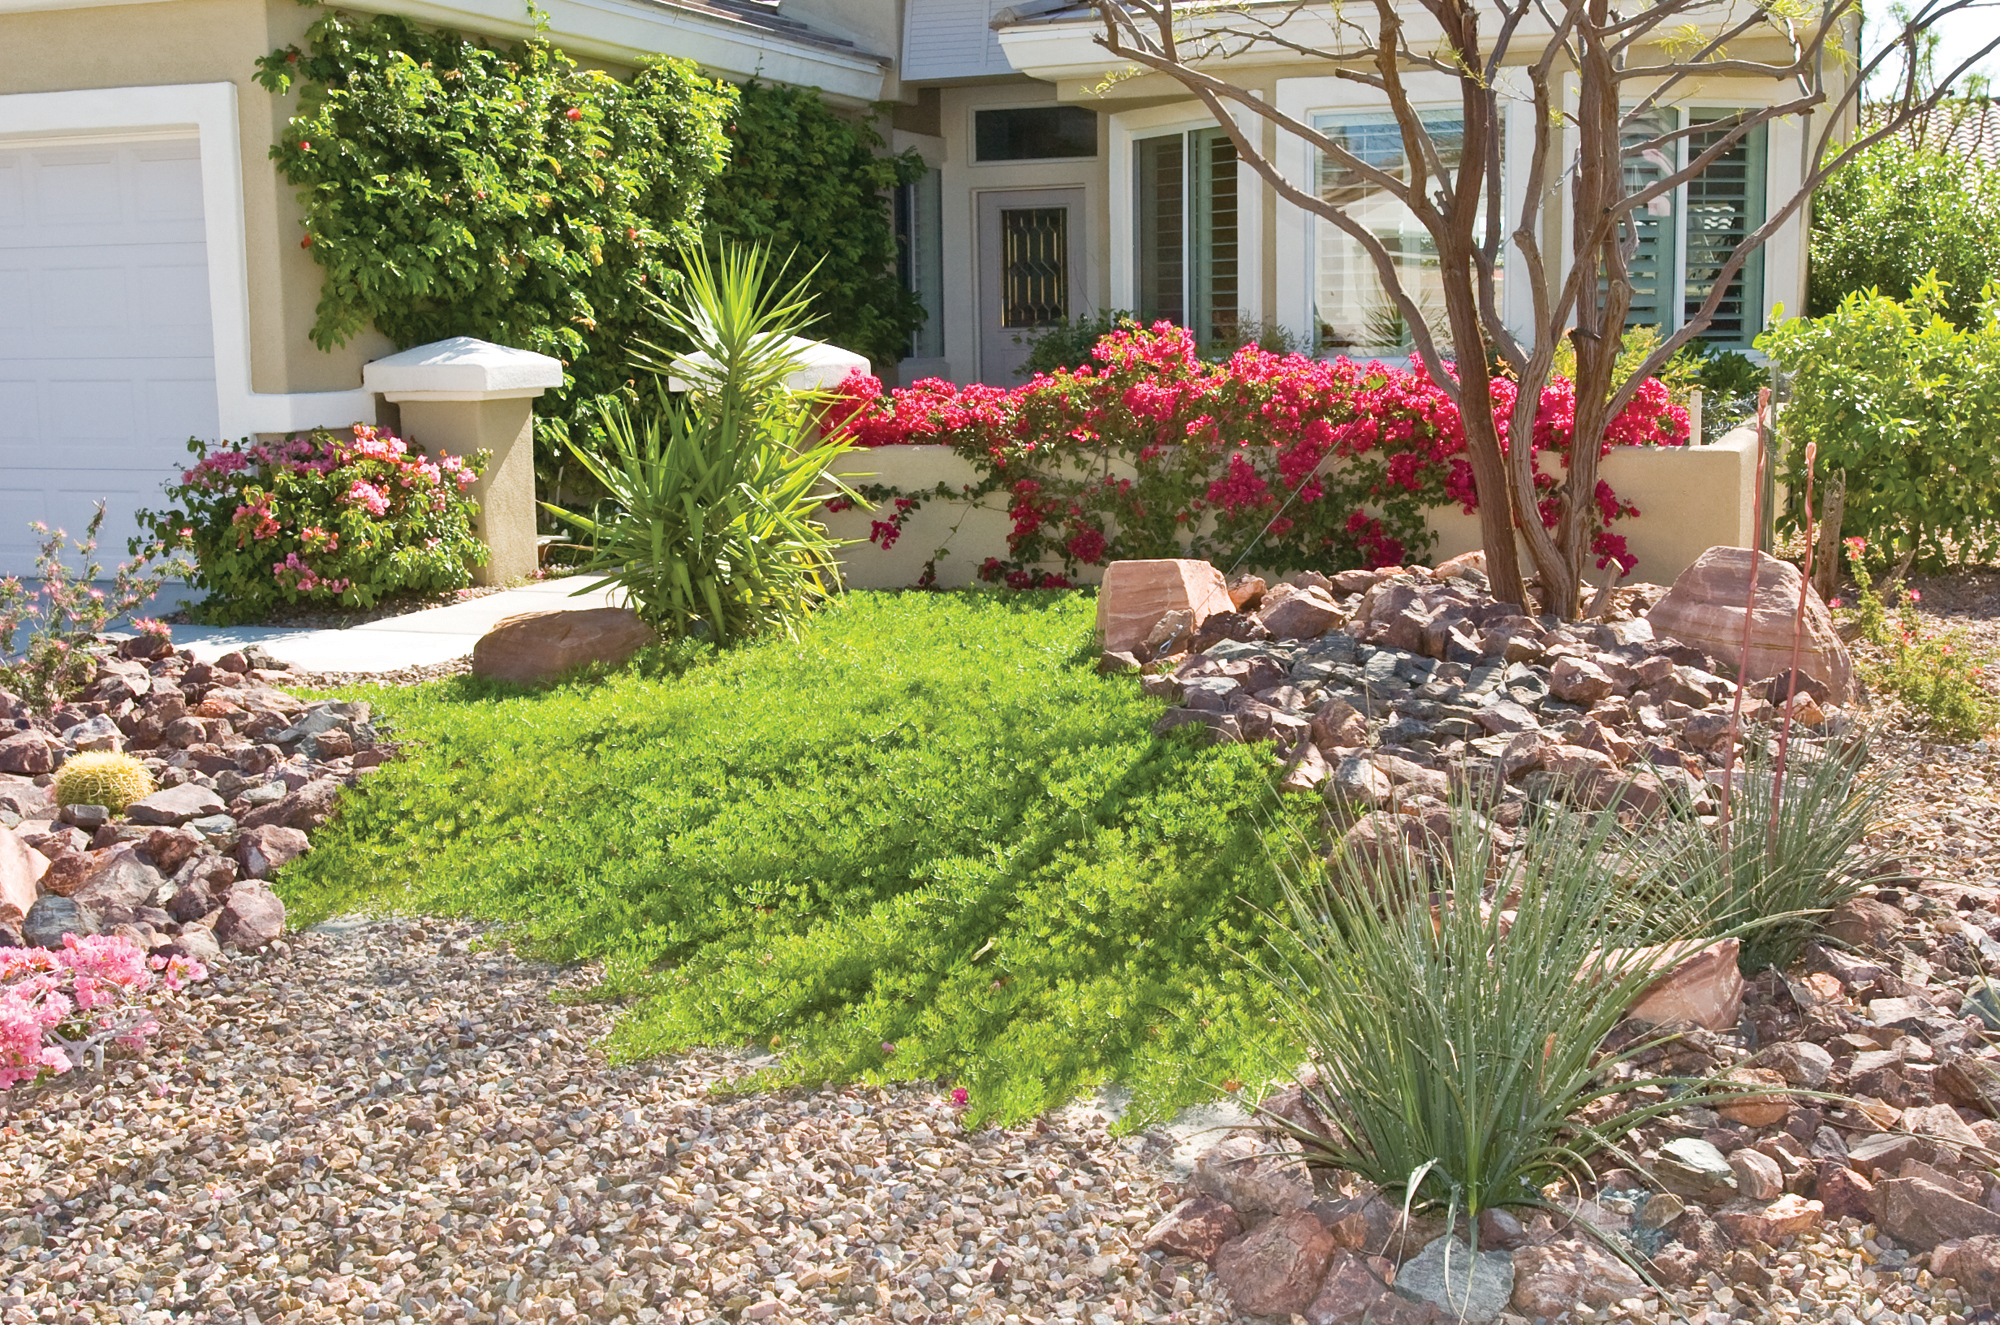 17. convert your front lawn to water-efficient landscaping